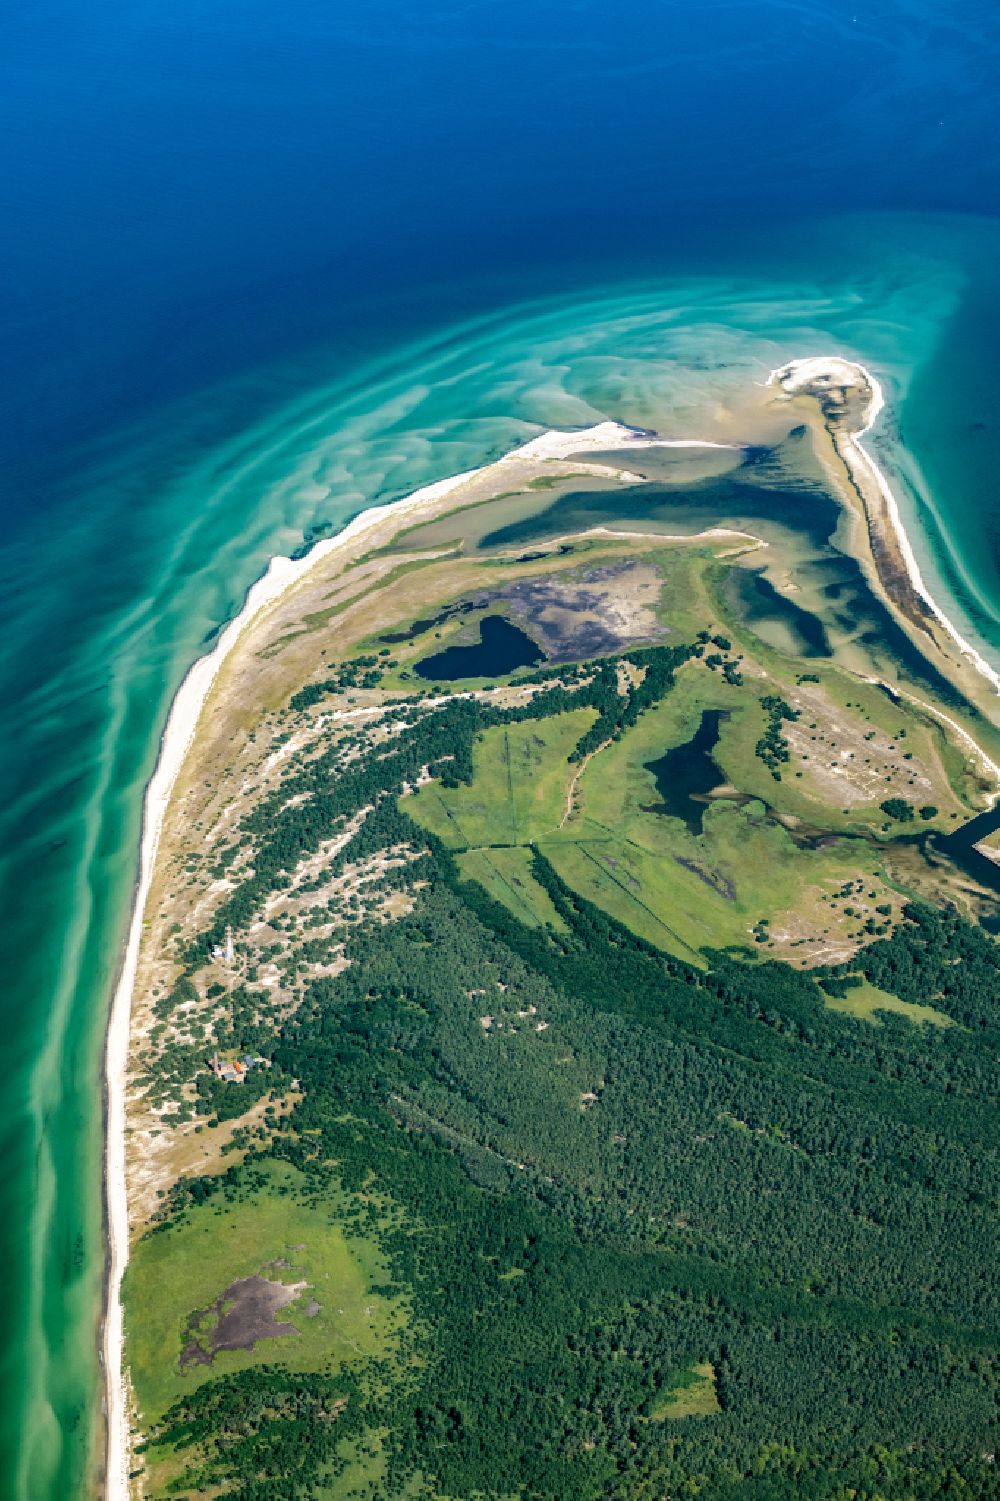 Born am Darß from the bird's eye view: Sandbank- land area by flow under the sea water surface the Baltic Sea at the Darsser Ort nature reserve in Born am Darss at the baltic sea coast in the state Mecklenburg - Western Pomerania, Germany